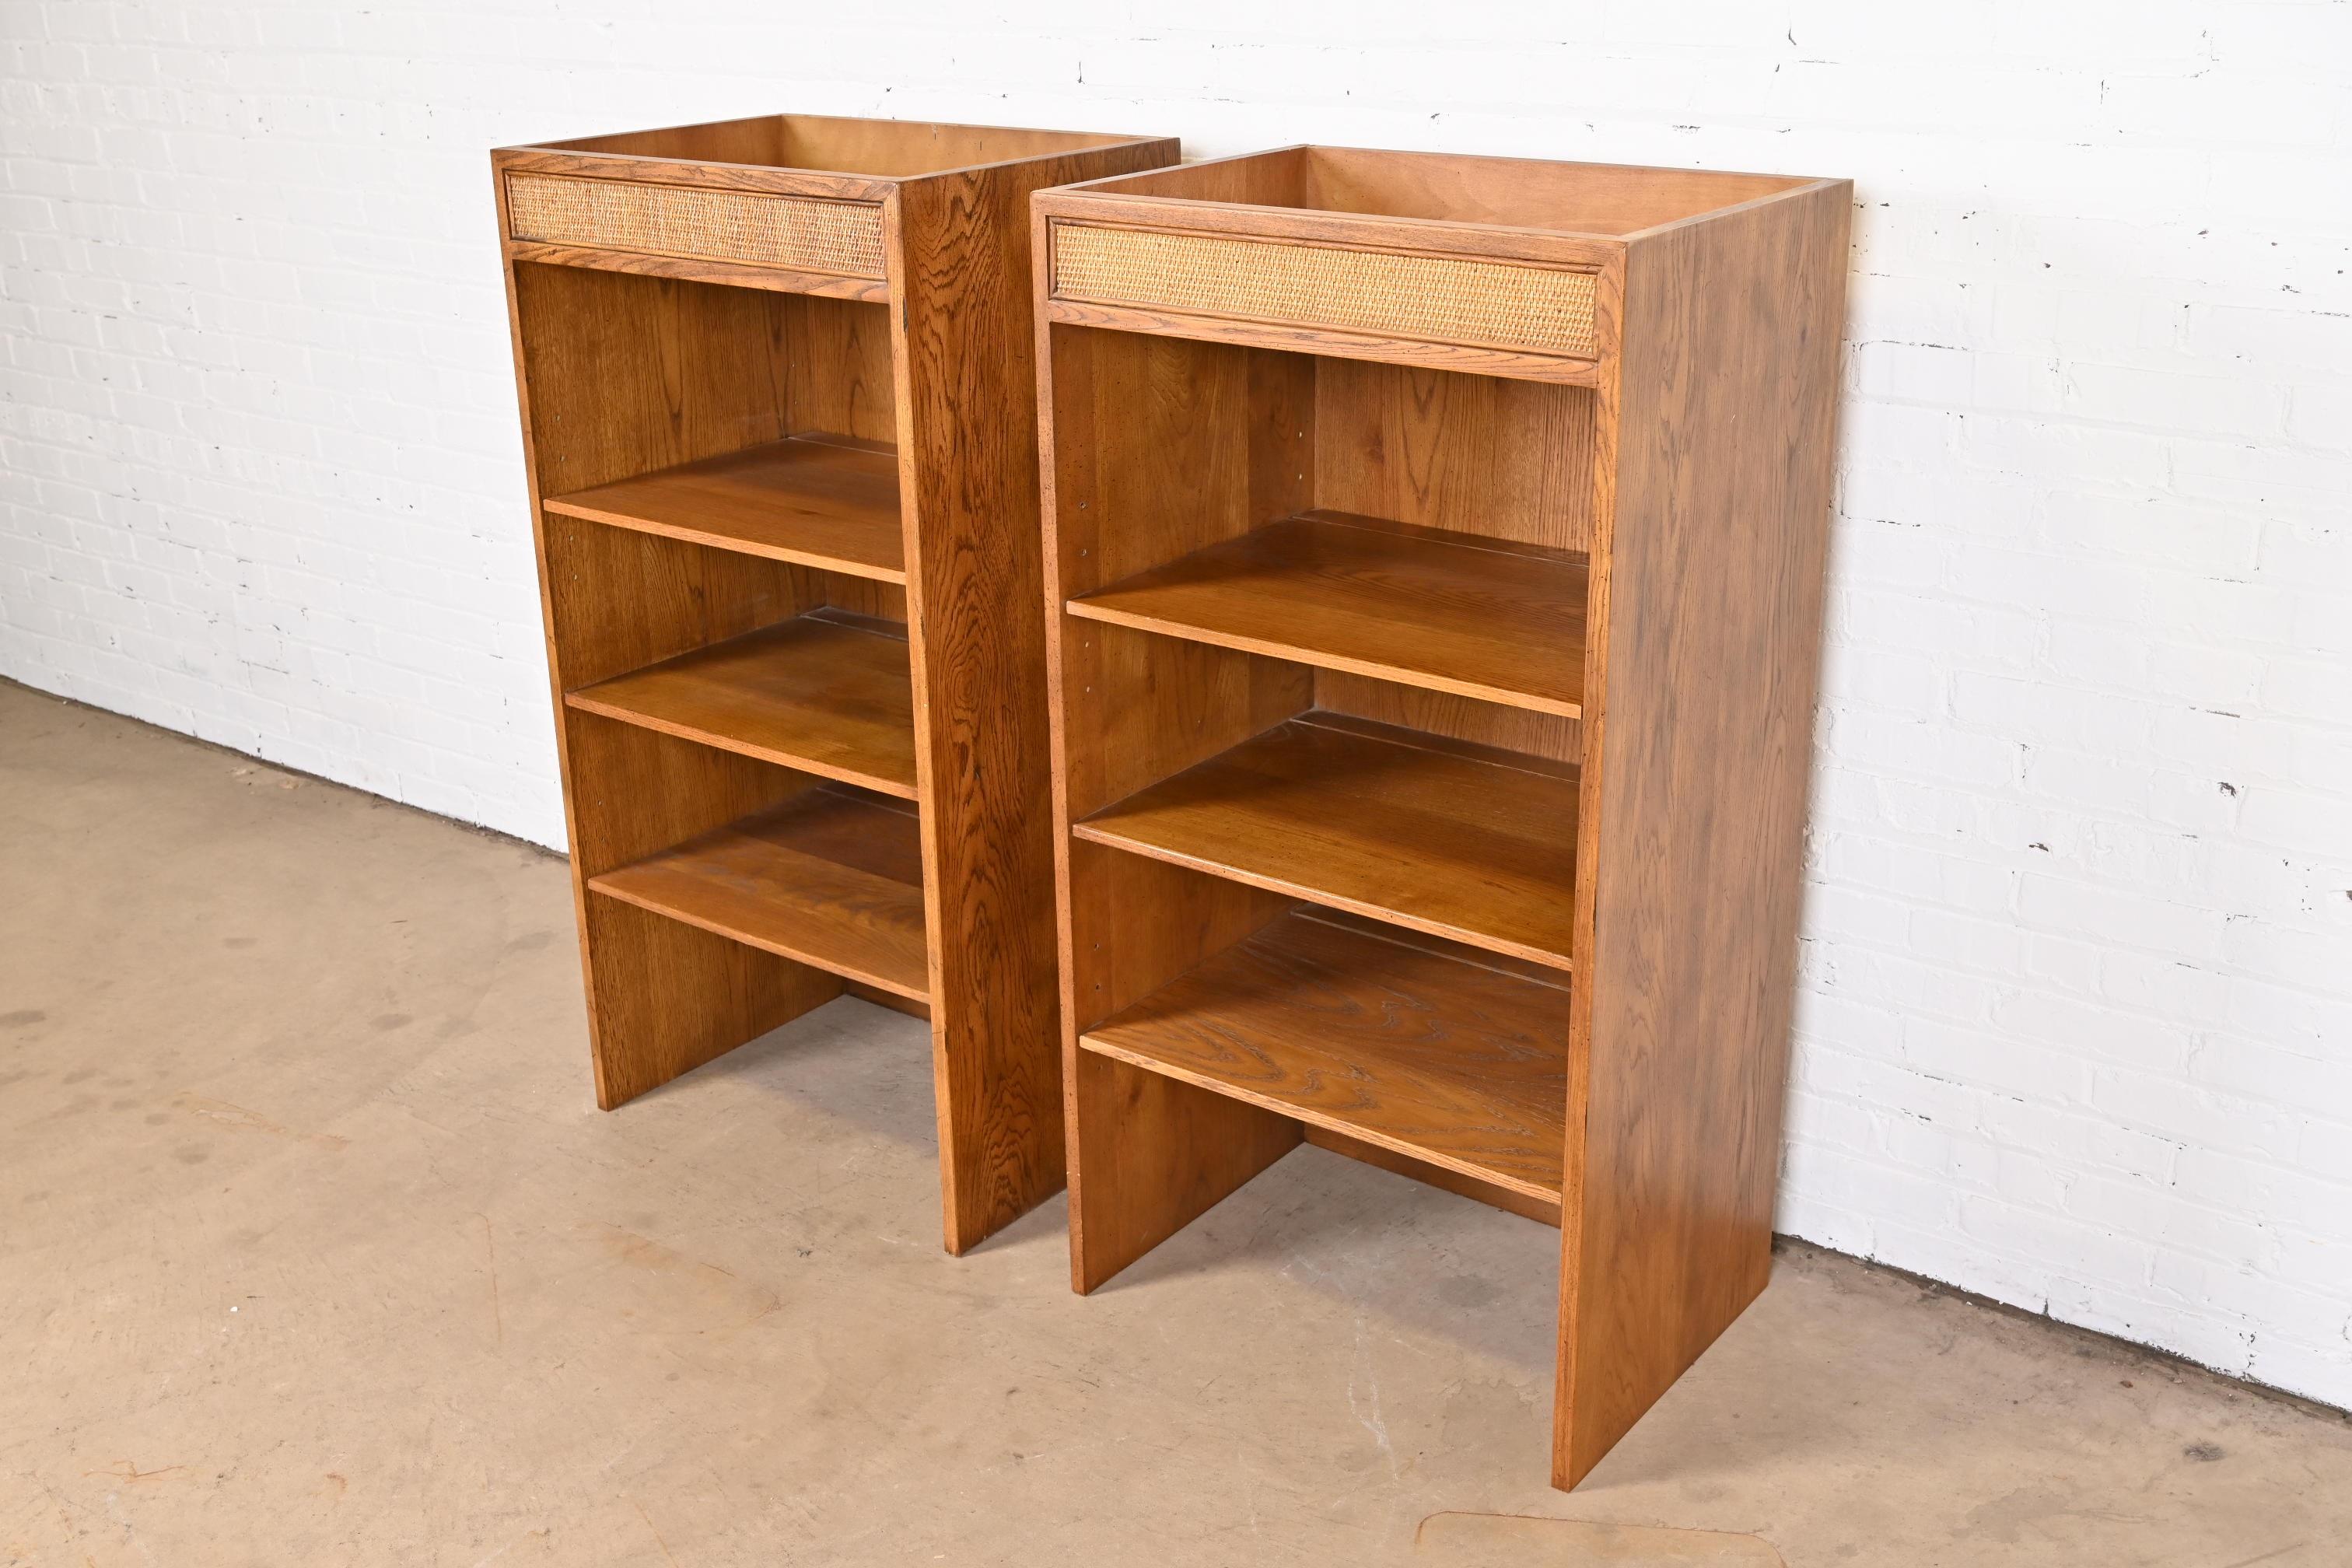 A nice pair of Mid-Century Modern bookcase hutches

By Henredon, 